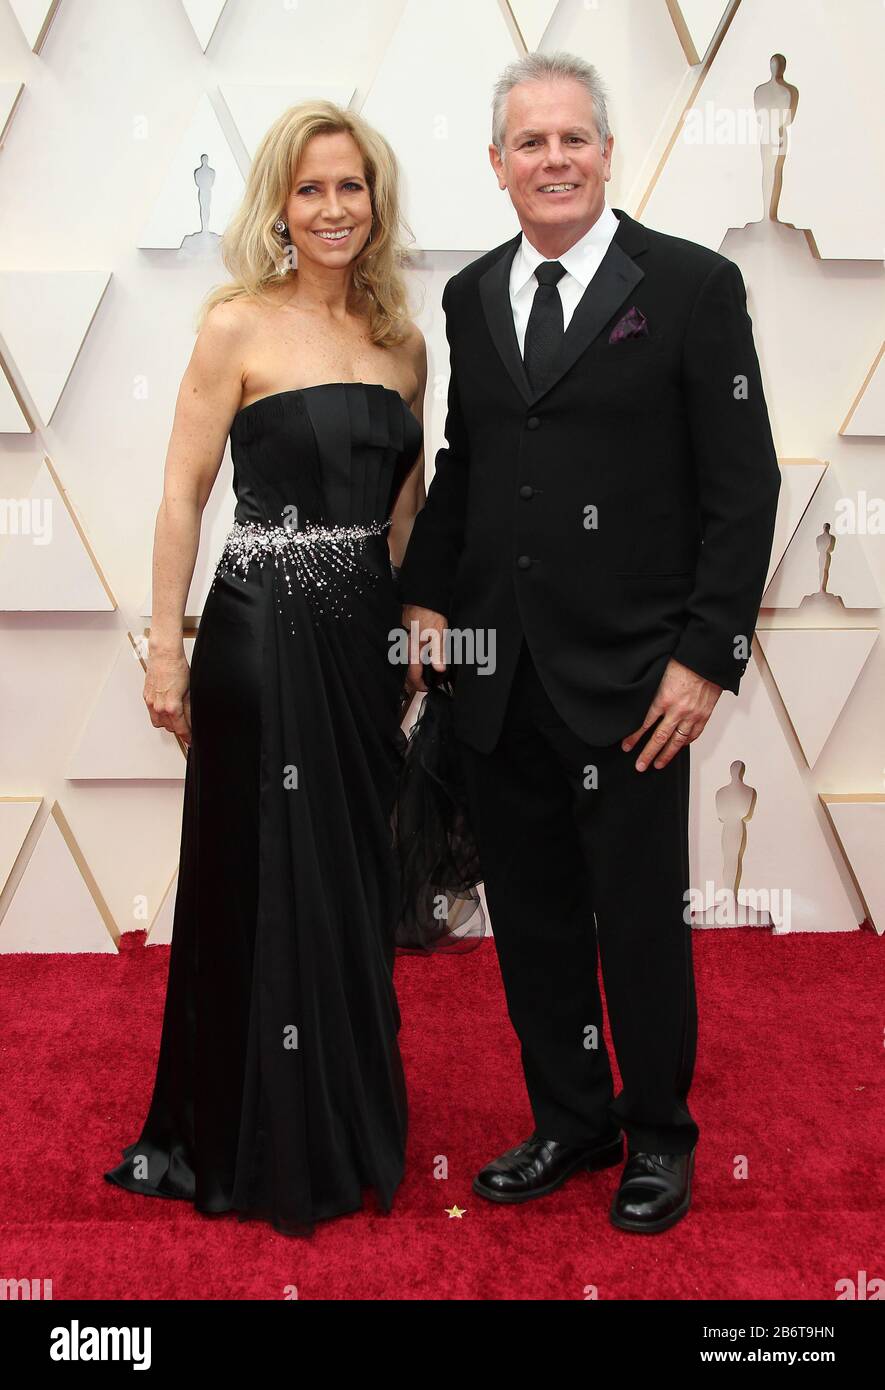 92nd Academy Awards (Oscars 2020) - Arrivals held at the Dolby Theatre in Los Angeles, California. Featuring: Guests Where: Los Angeles, California, United States When: 09 Feb 2020 Credit: Adriana M. Barraza/WENN Stock Photo